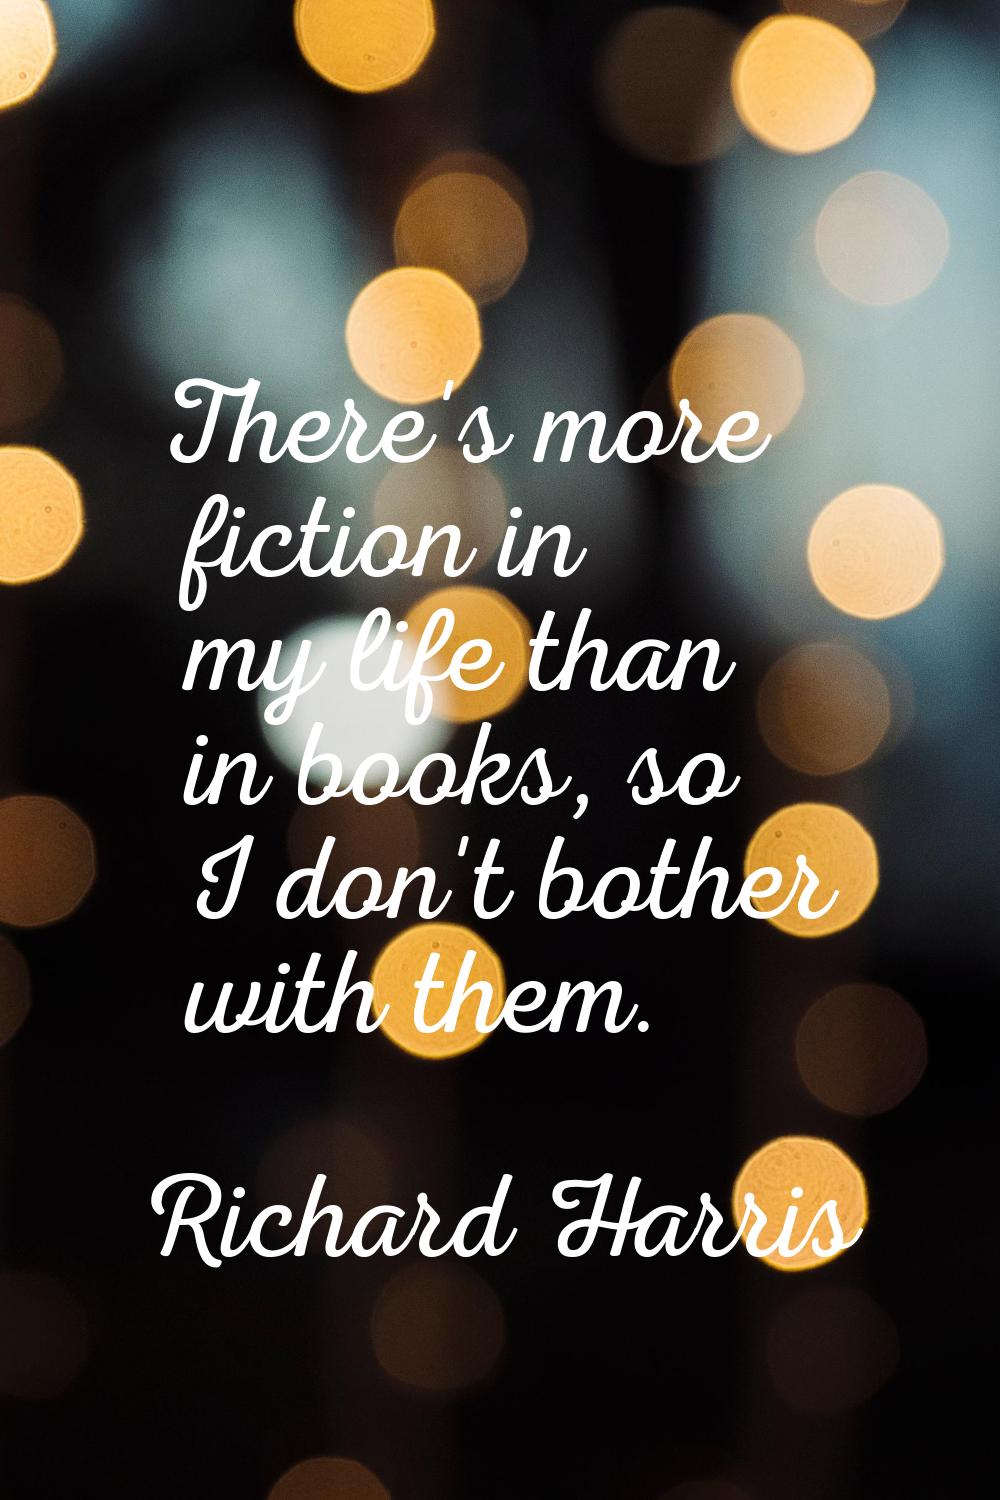 There's more fiction in my life than in books, so I don't bother with them.